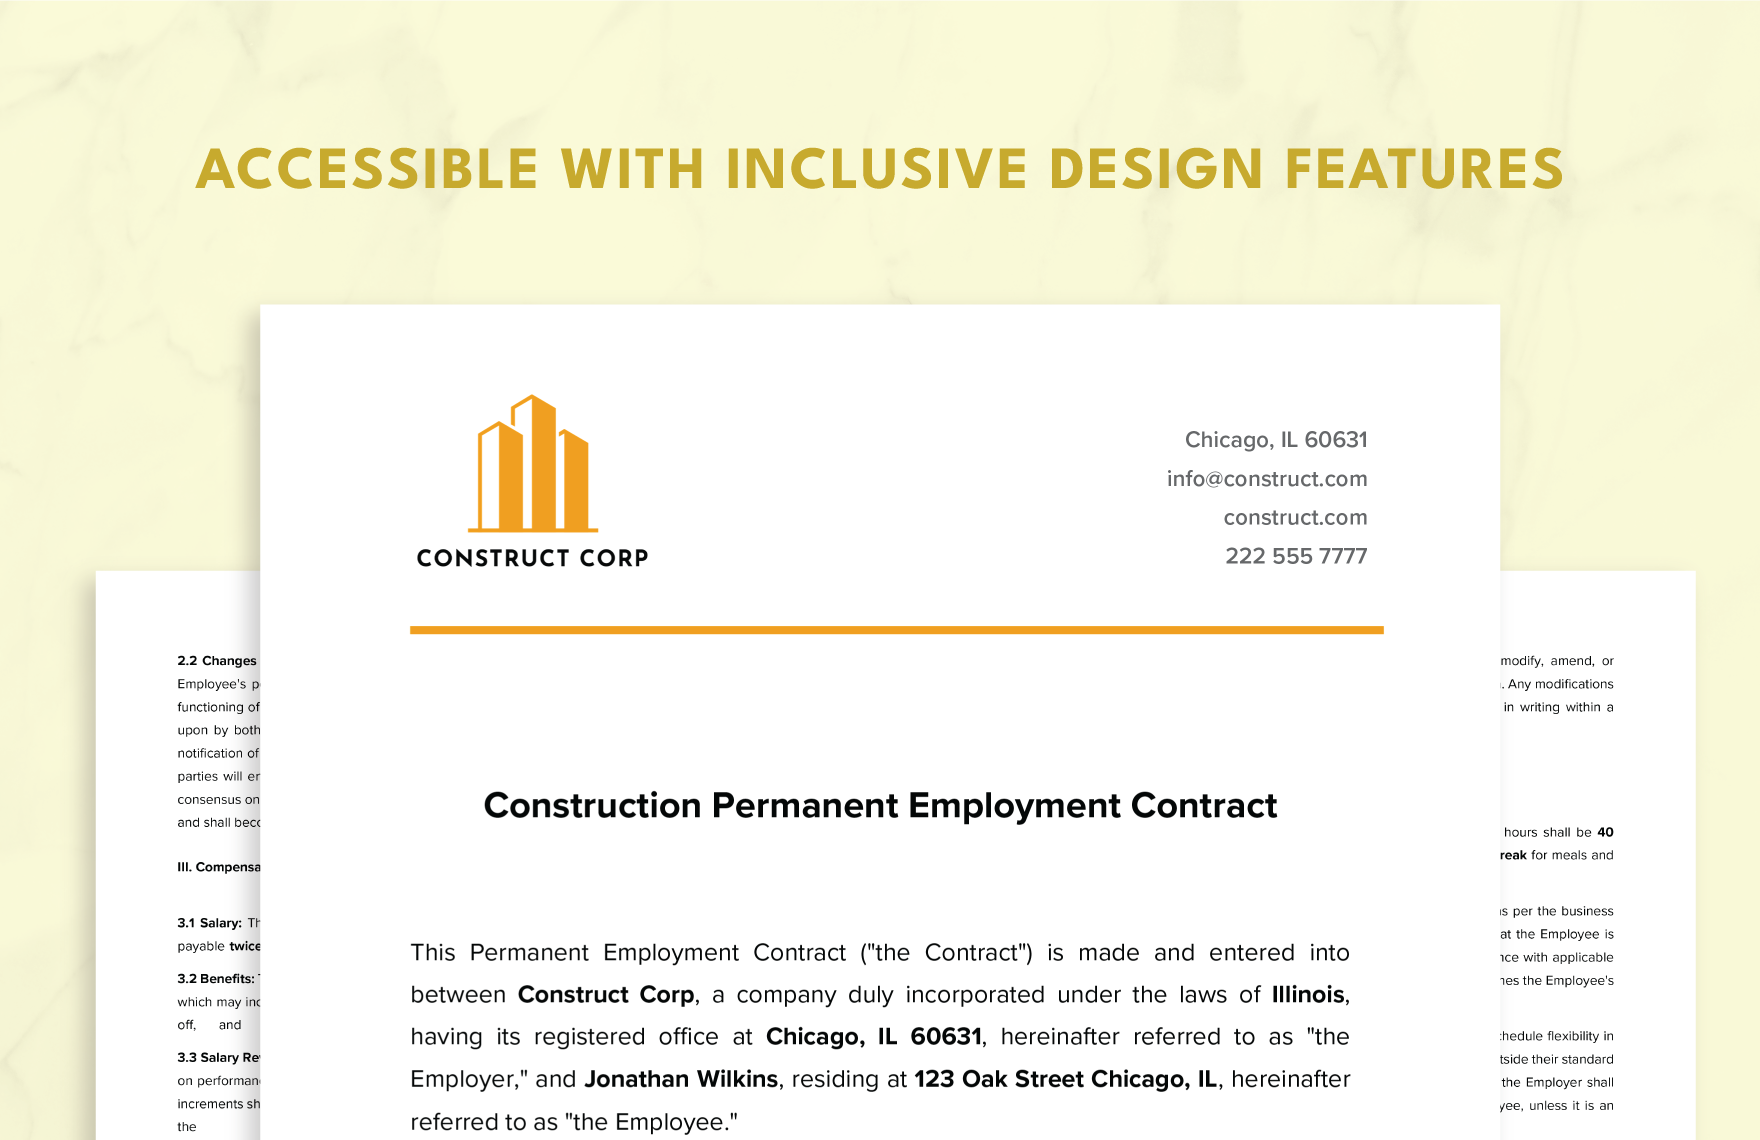 Construction Permanent Employment Contract Template